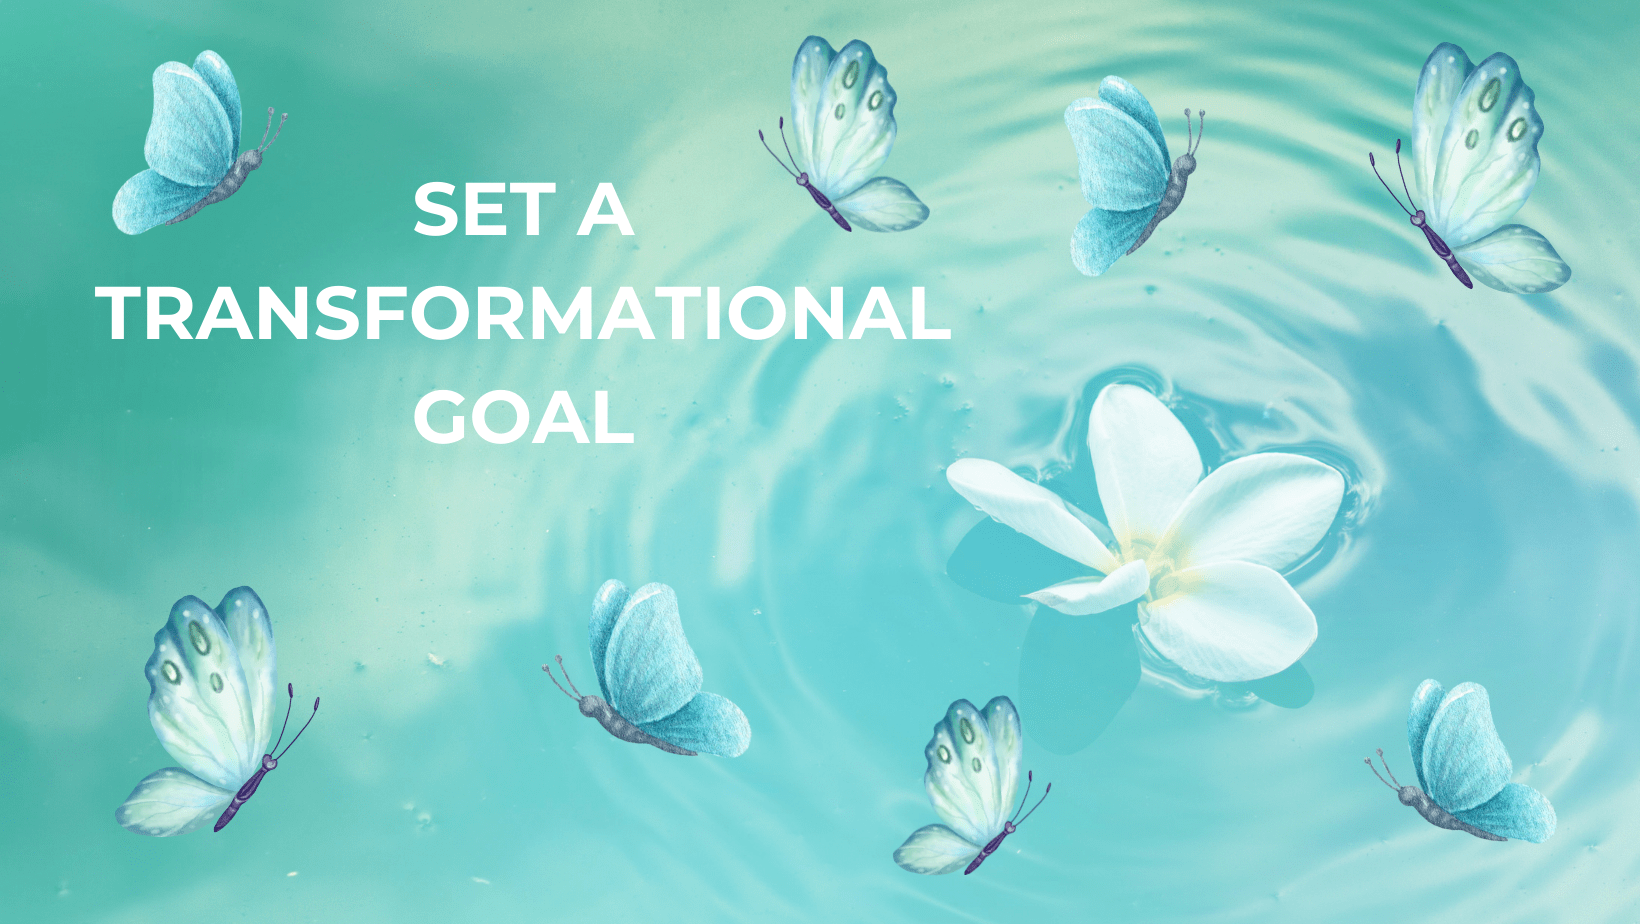 STEP TWO: SET A TRANSFORMATIONAL GOAL